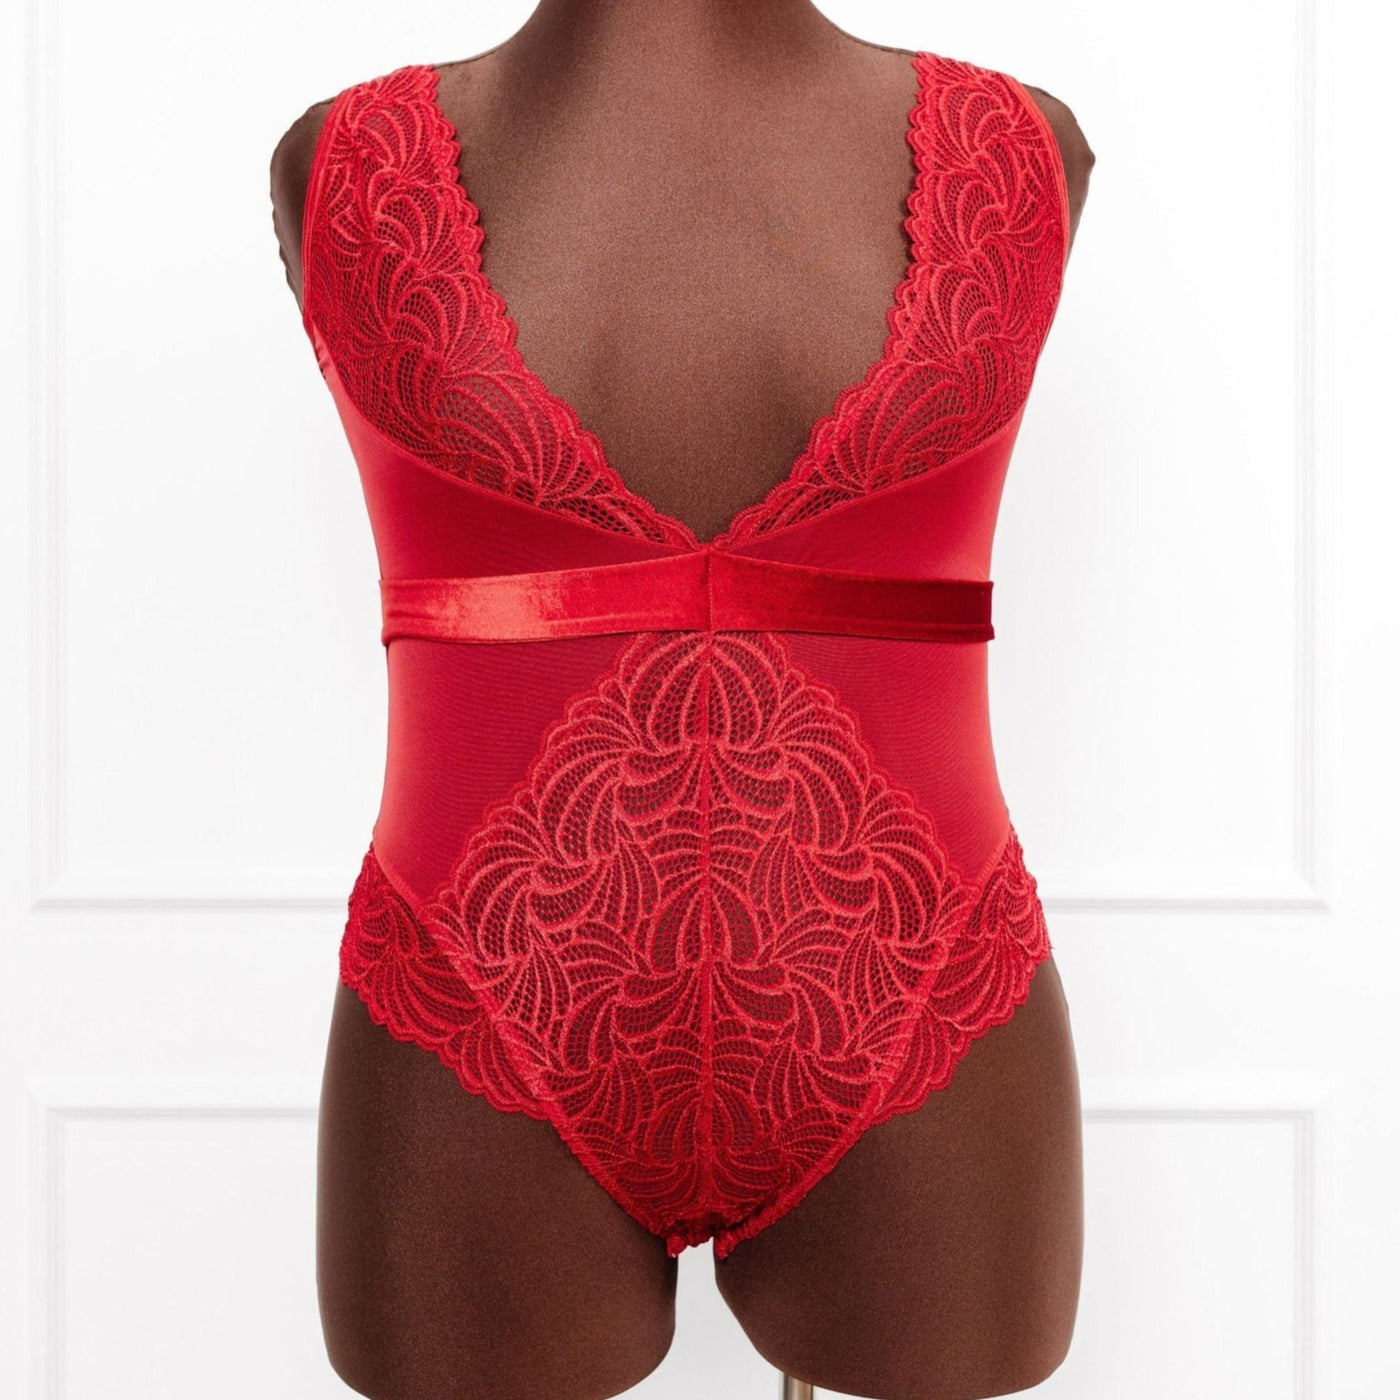 Lacy Plunge Teddy - Red - Mentionables